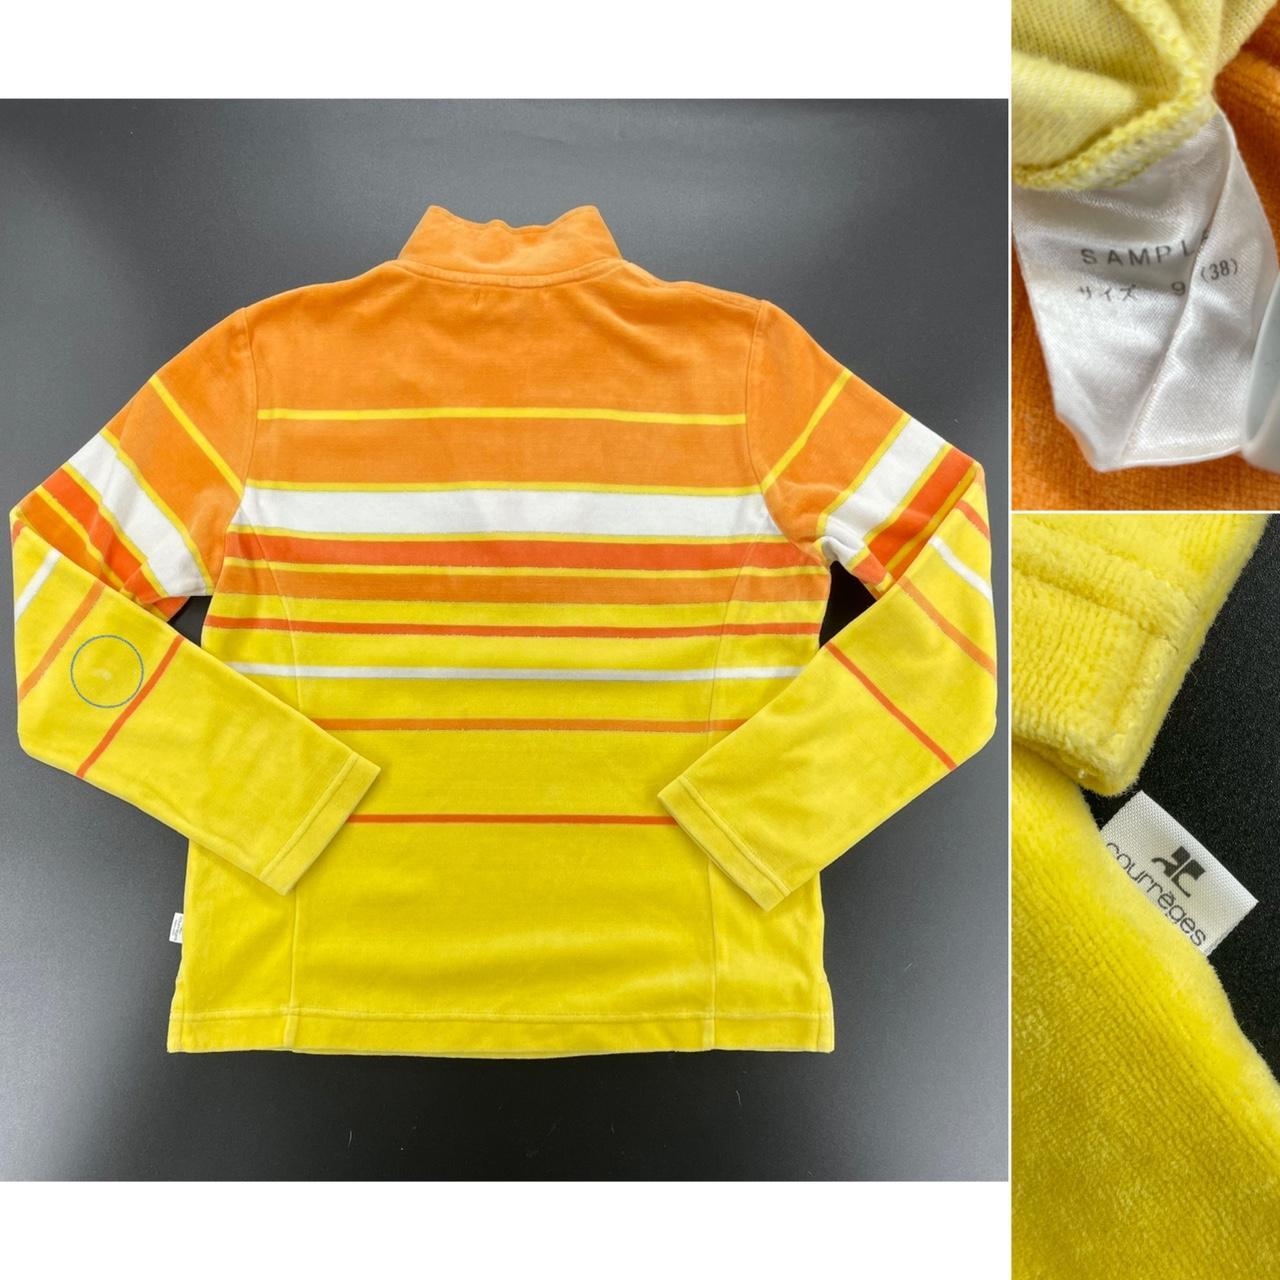 Courrèges Women's Orange and Yellow Top (3)